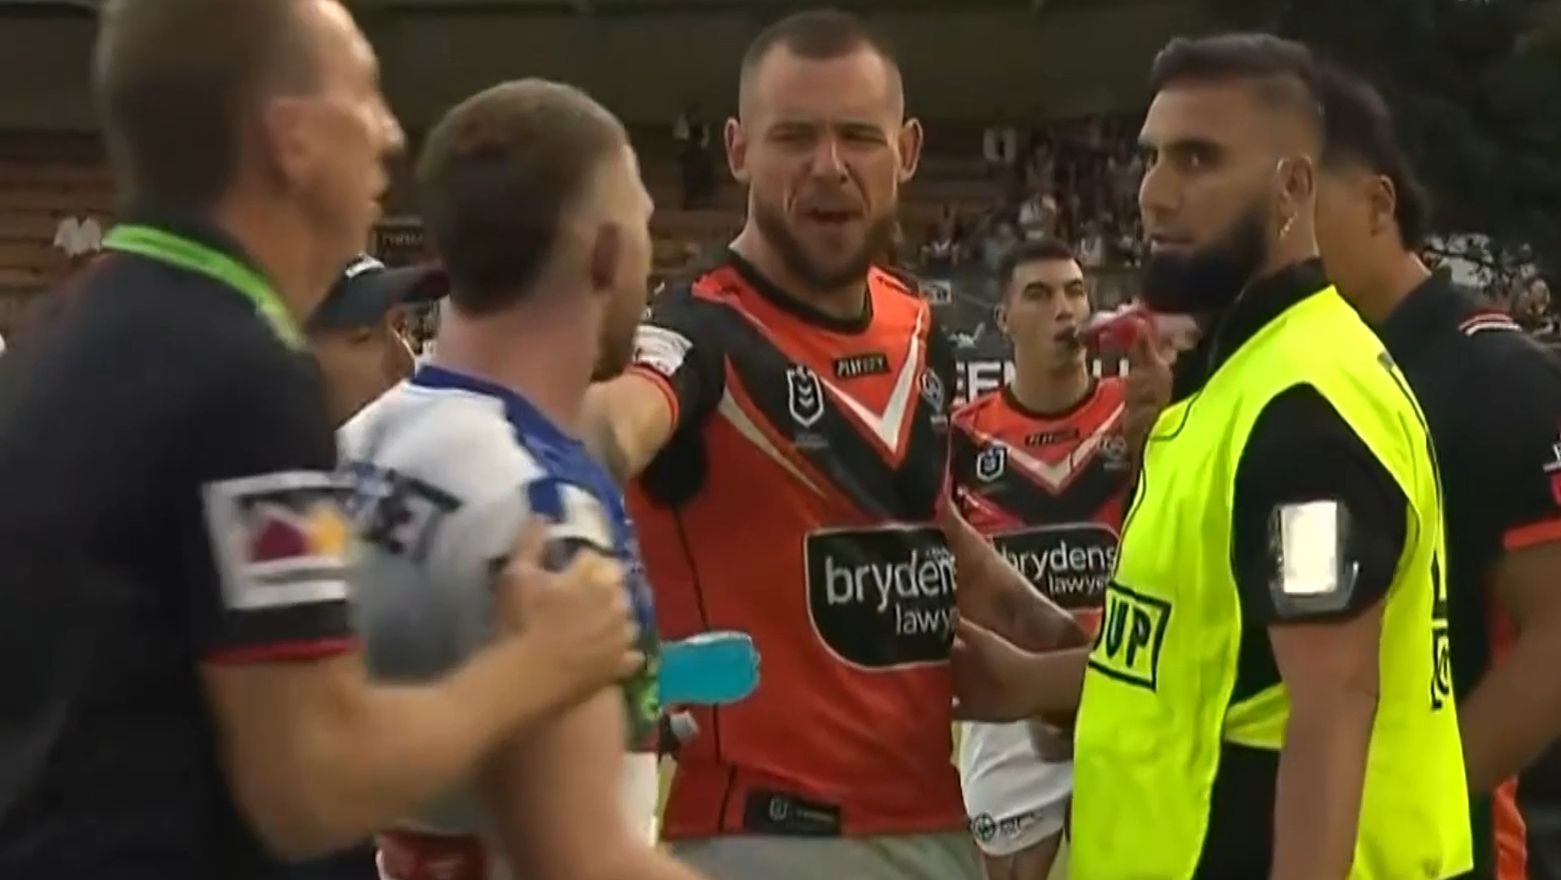 Wests Tigers firebrand David Klemmer and Knights player Jackson Hastings in a post-game scuffle.